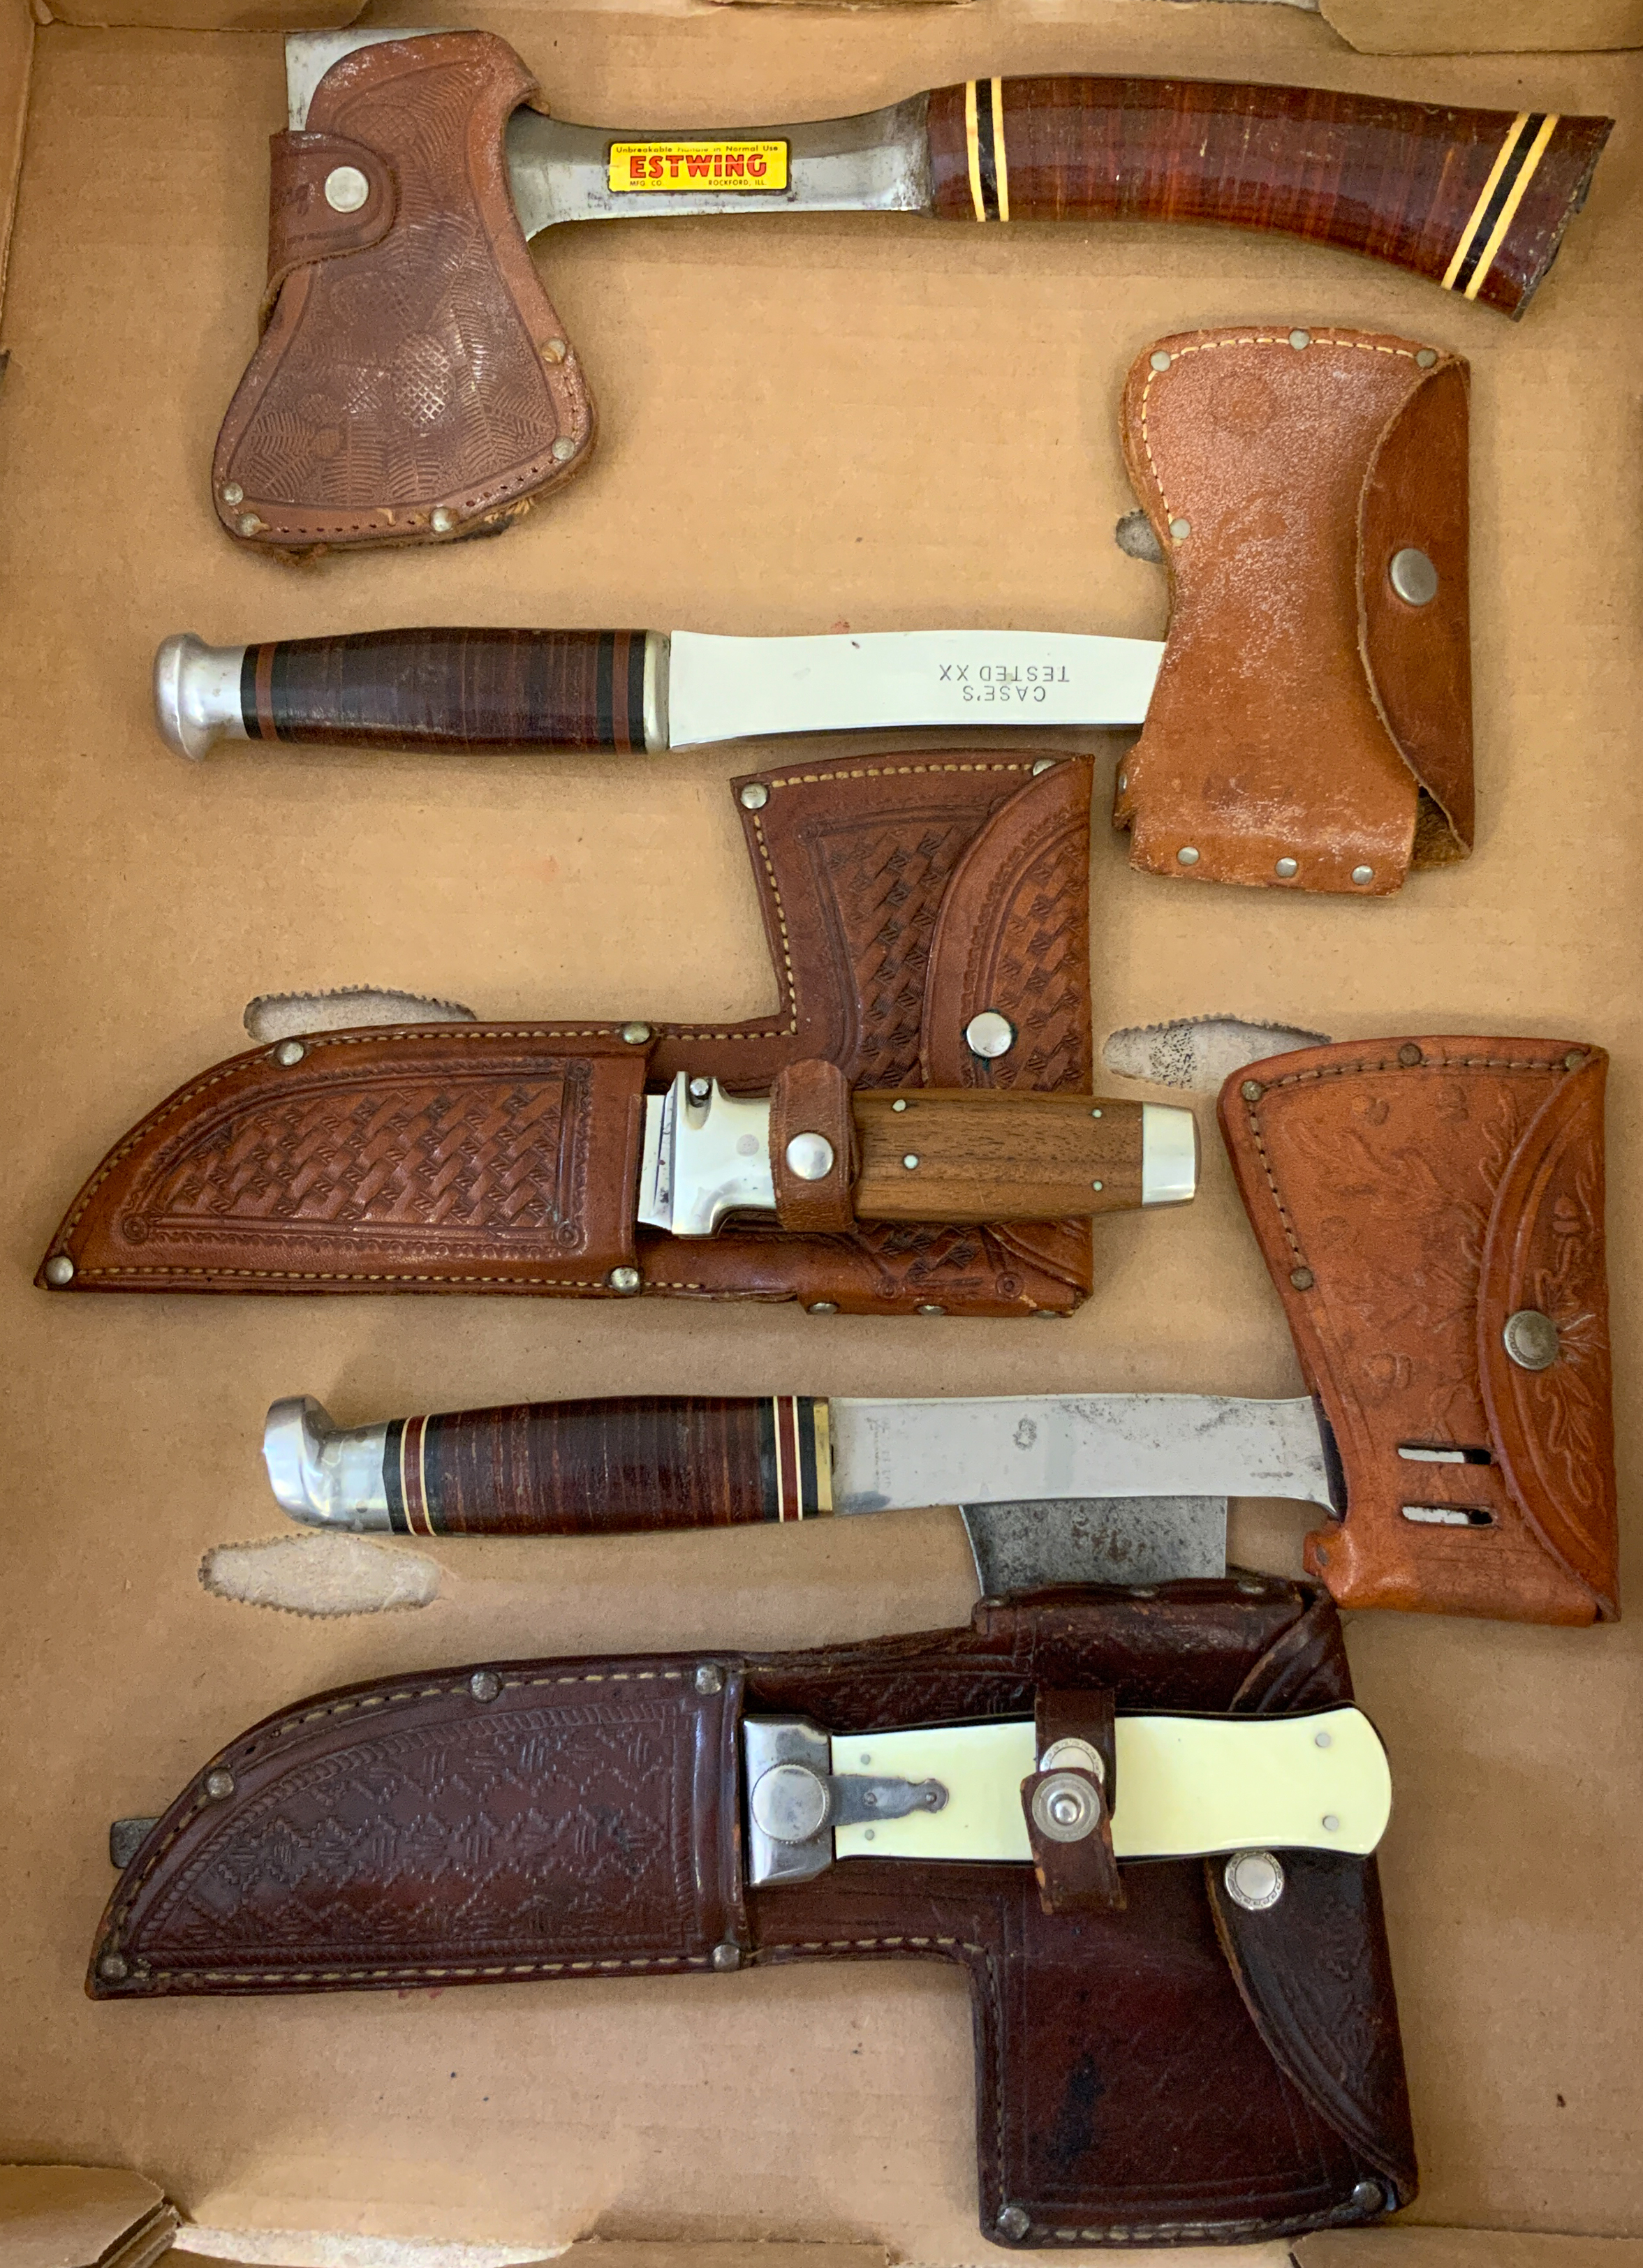 HATCHETS, KNIFE SETS AND MILITARY KNIVES